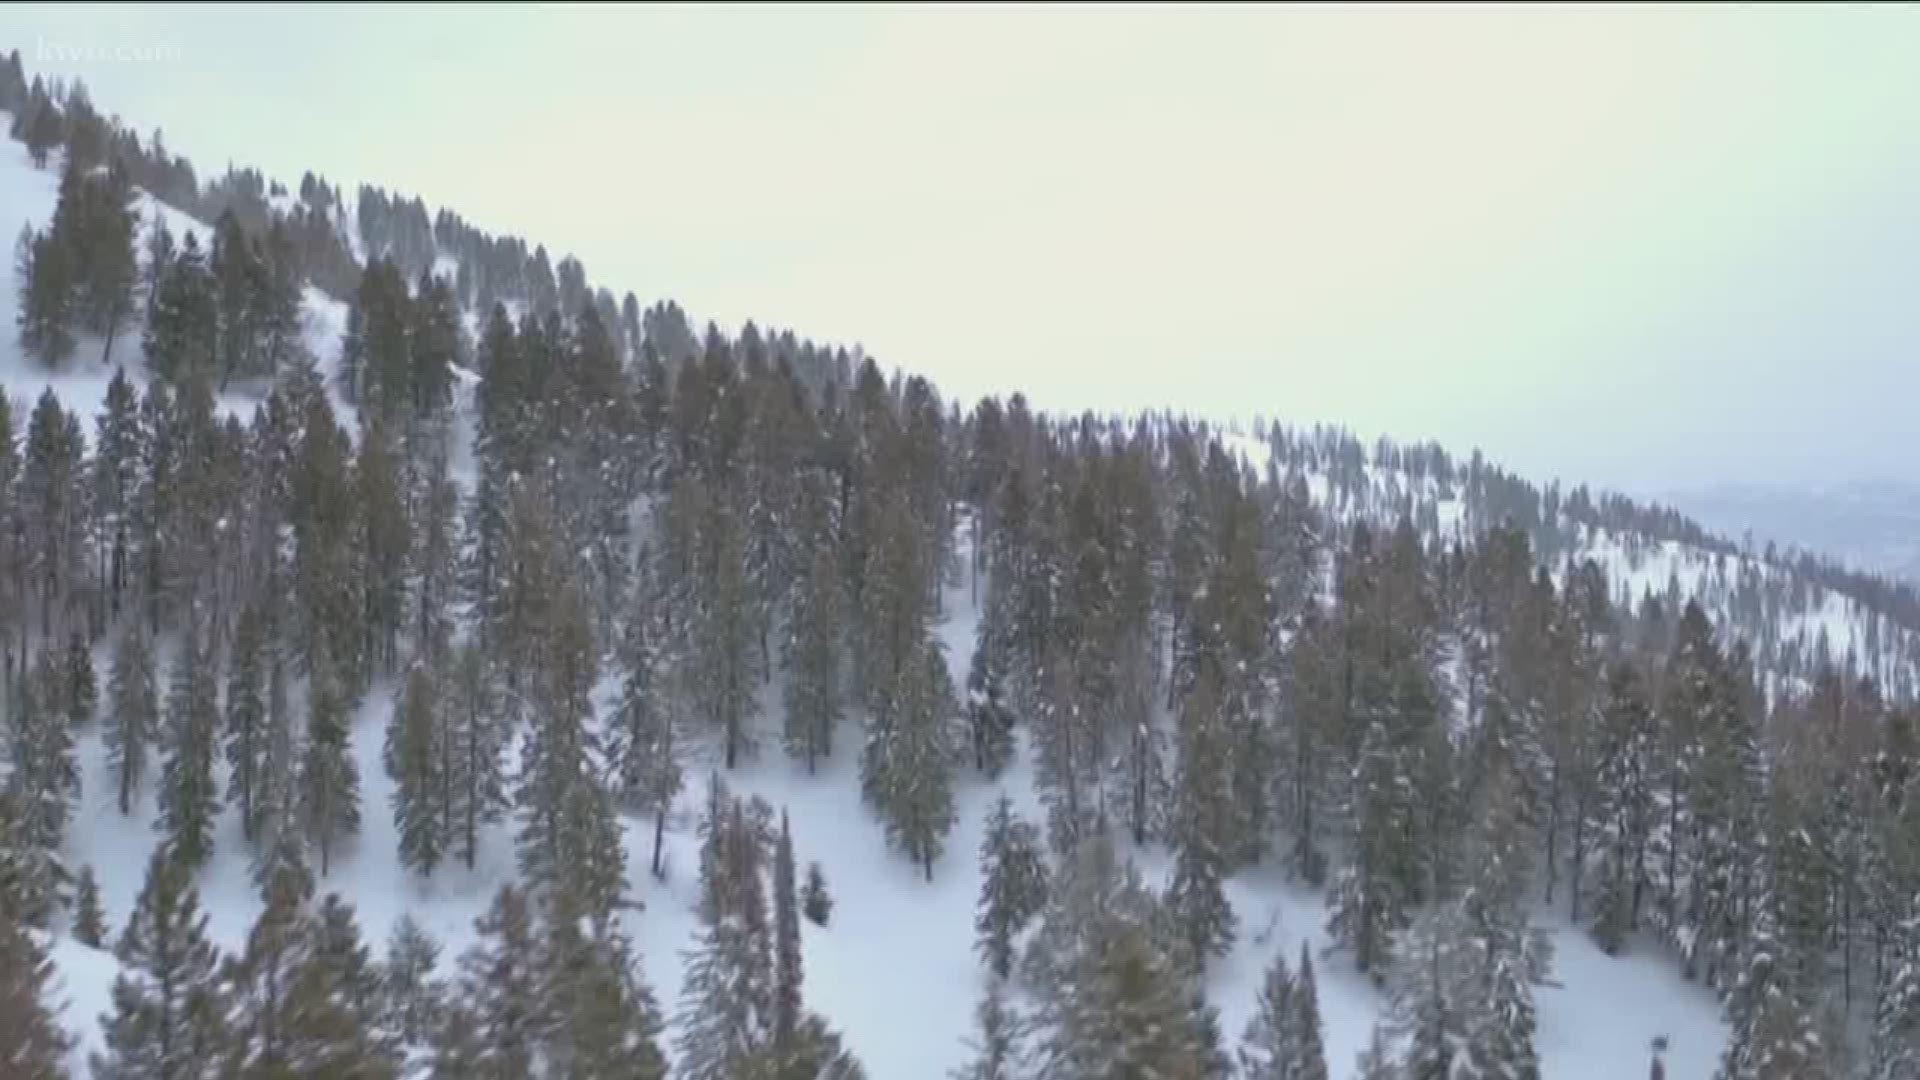 As part of KTVB's Backcountry Survival Series, Tami Tremblay talks to avalanch survivors and resucers about how to prepare and suvive an avalanche.